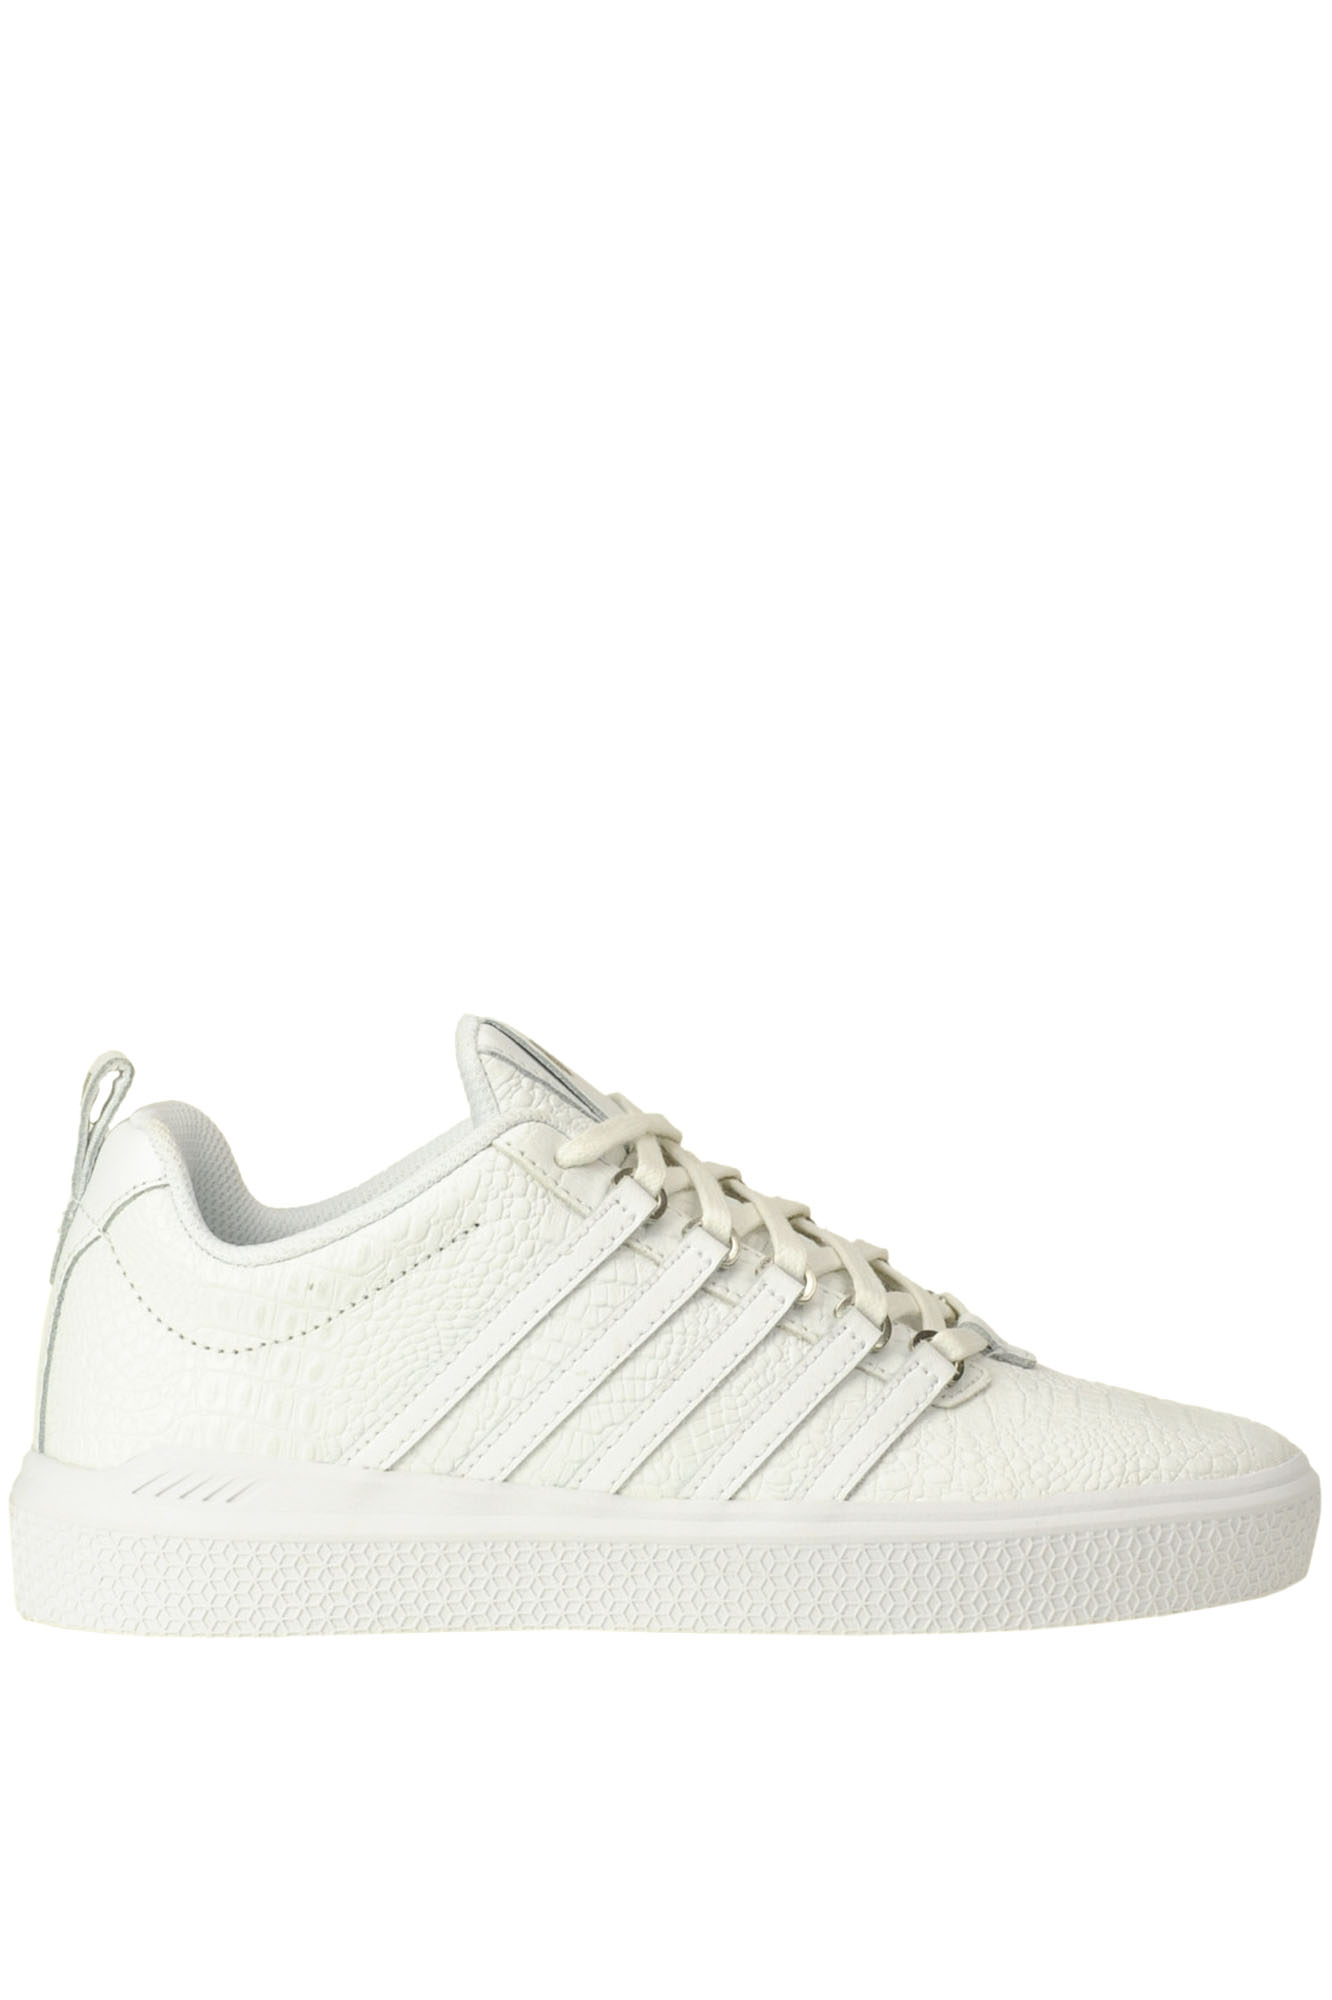 K.swiss Reptile Print Leather Trainers In White